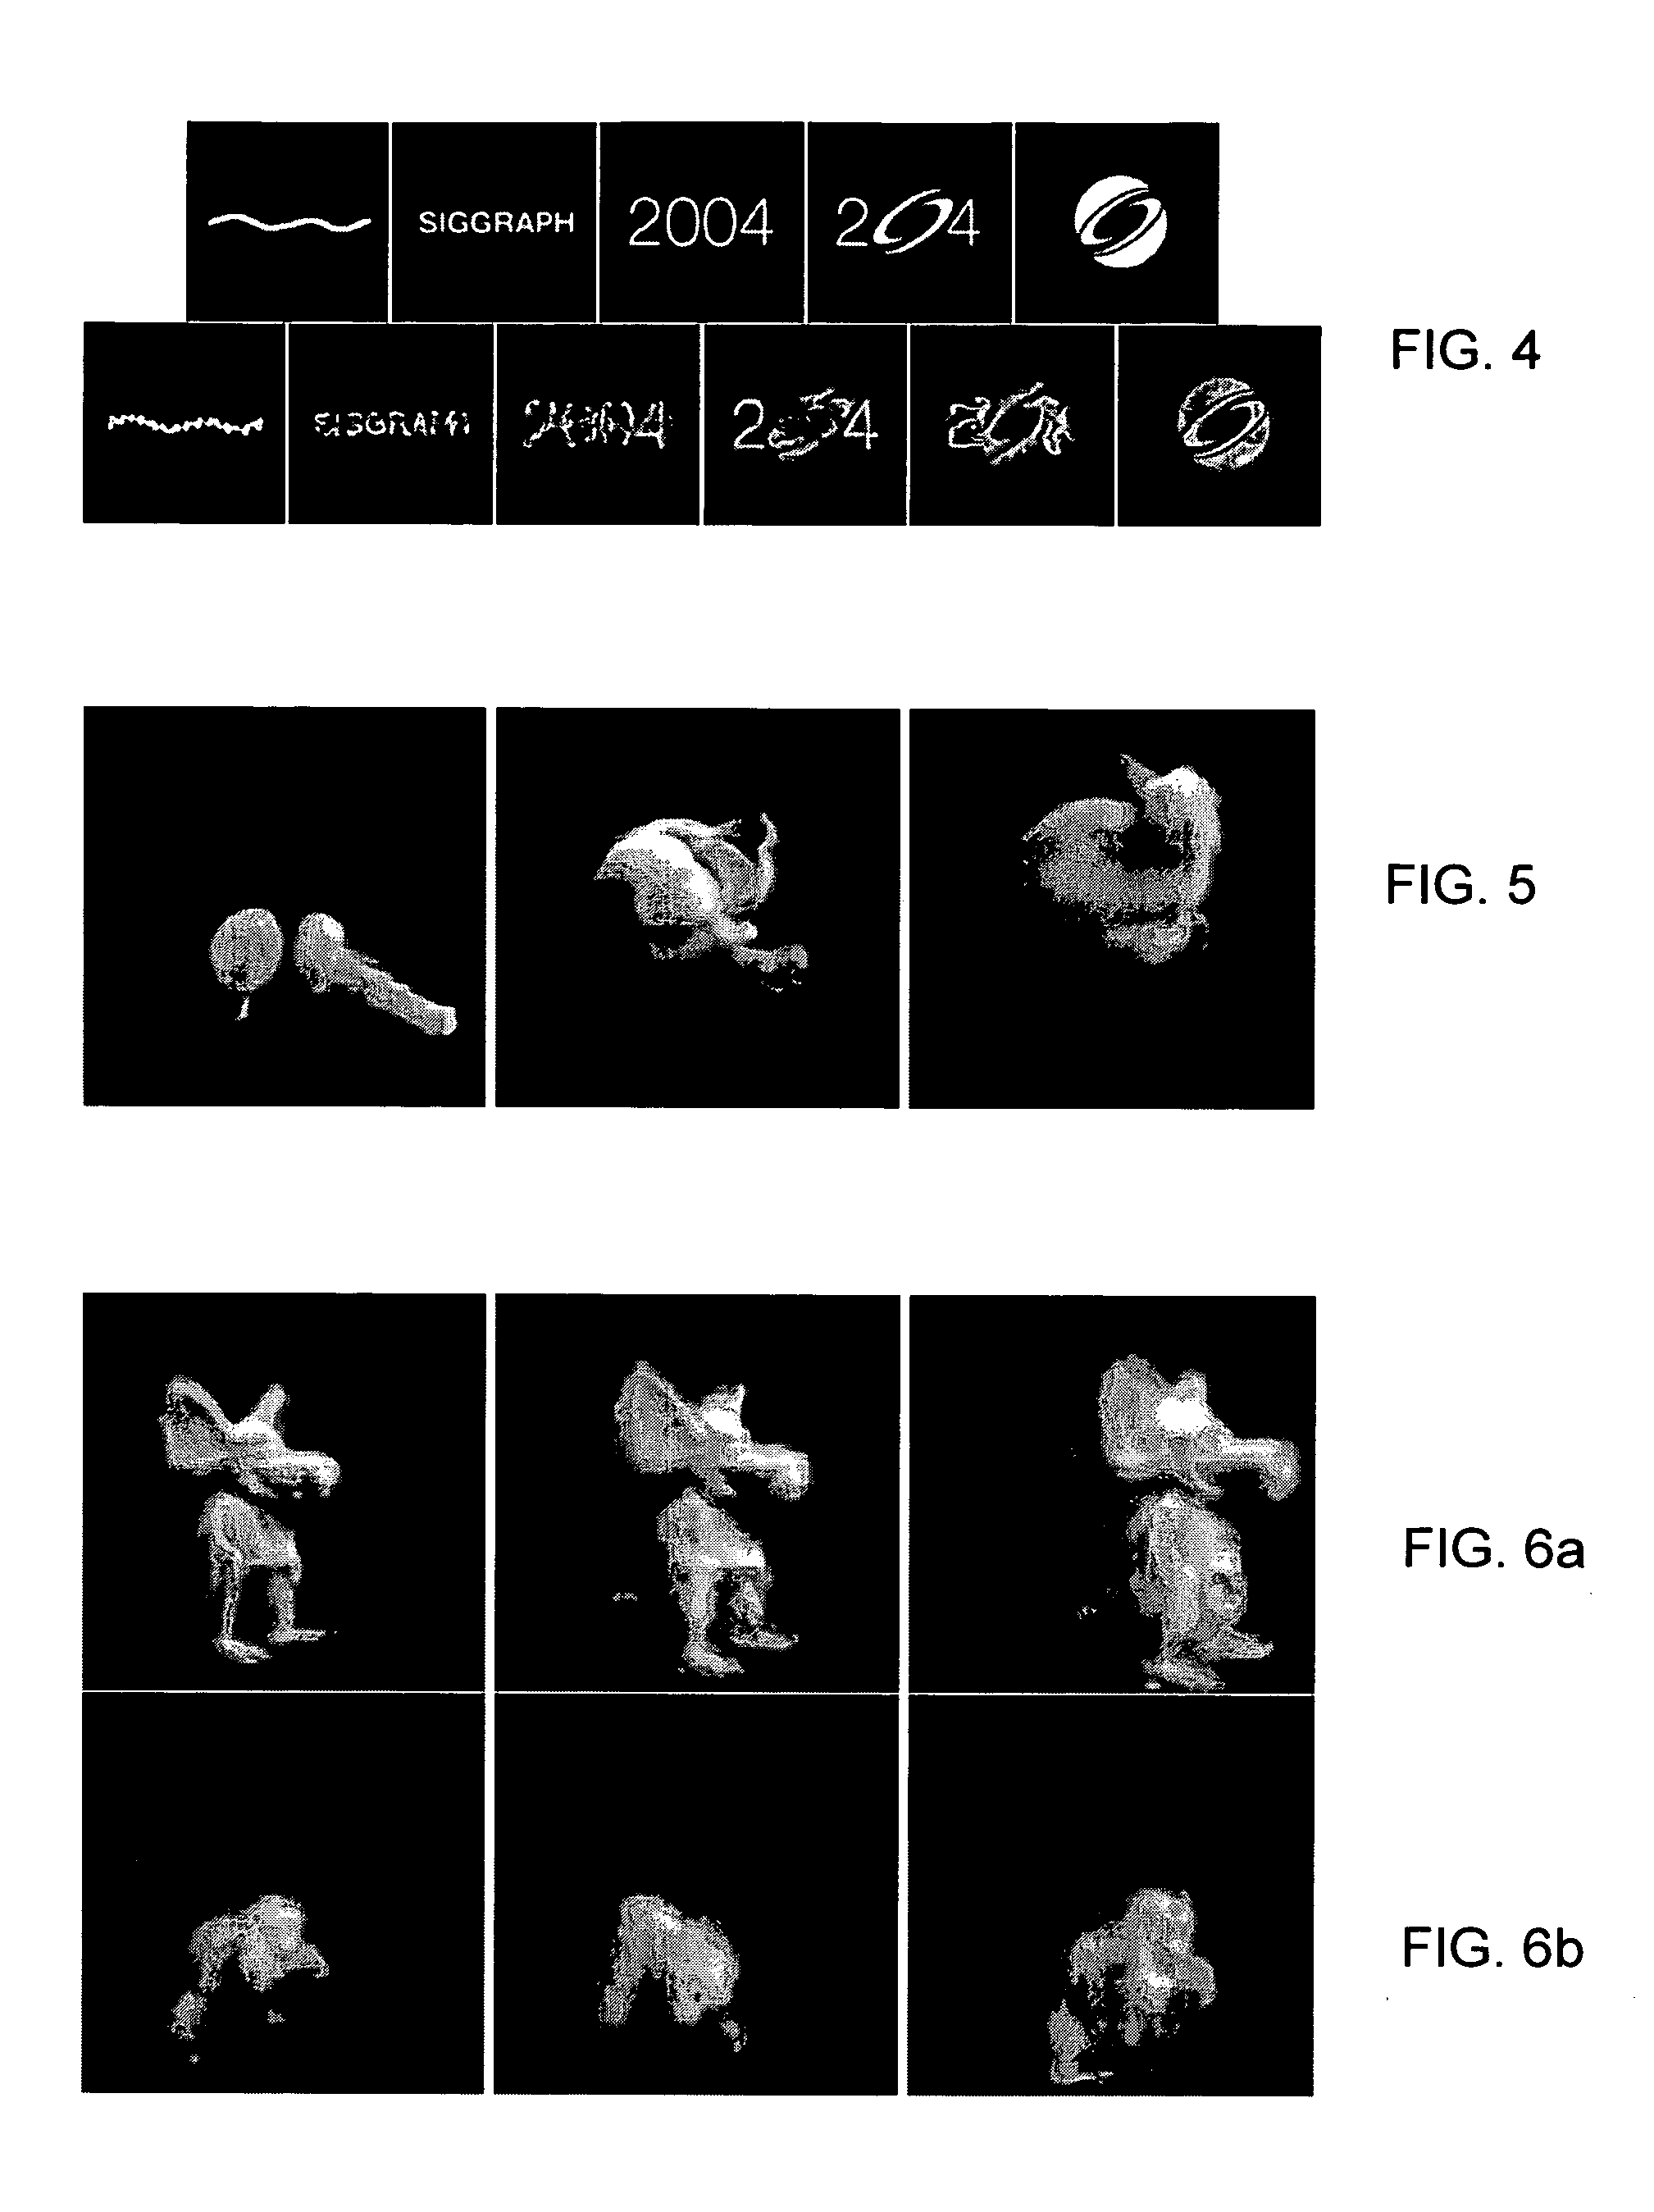 Method and system for performing computer graphic simulation of a fluid using target-driven control